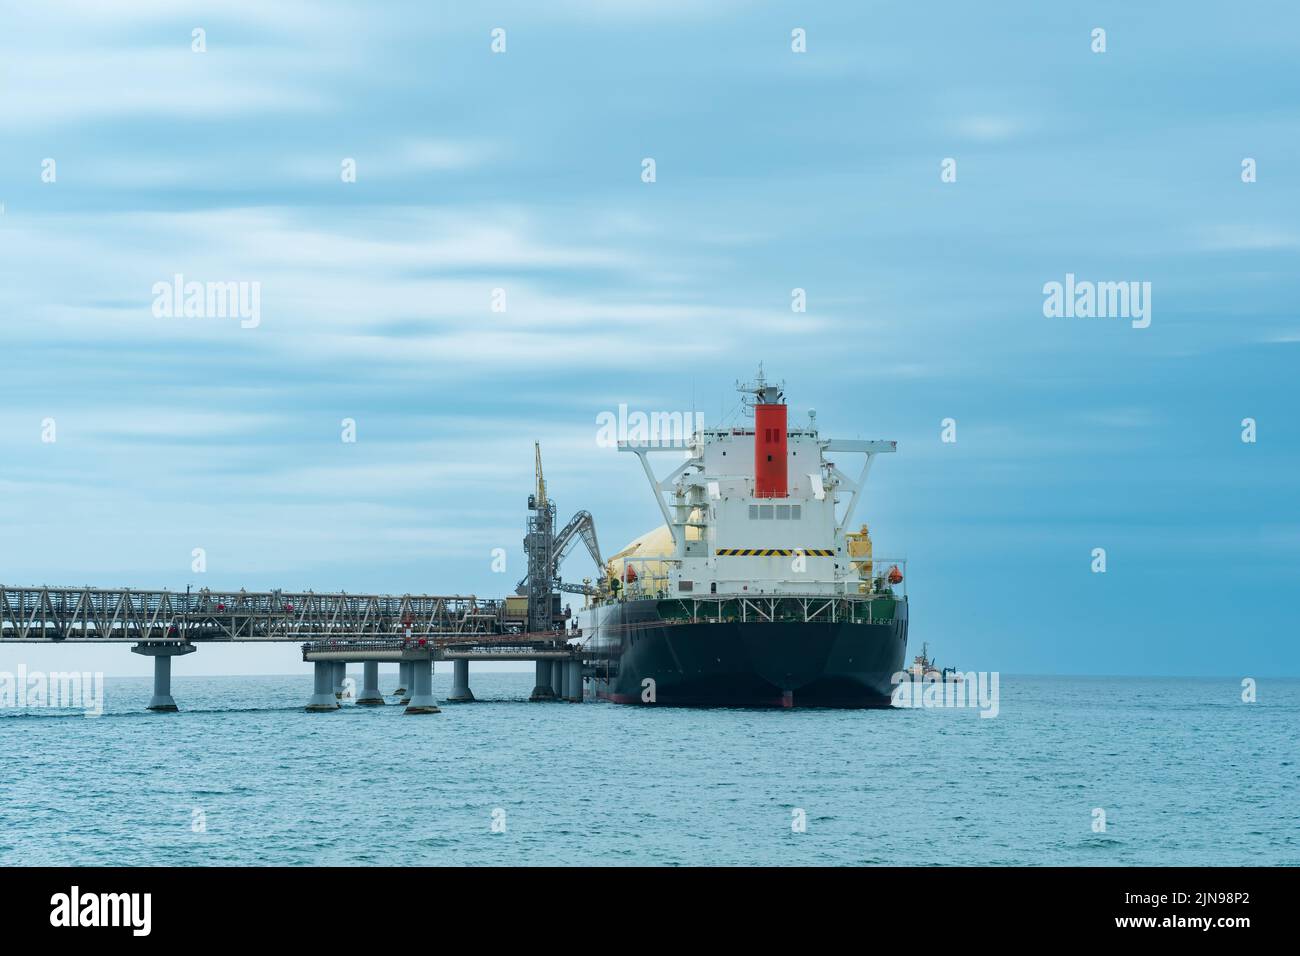 liquefied natural gas carrier tanker during loading at an LNG offshore terminal, in the distance the oil export terminal is visible in the sea Stock Photo